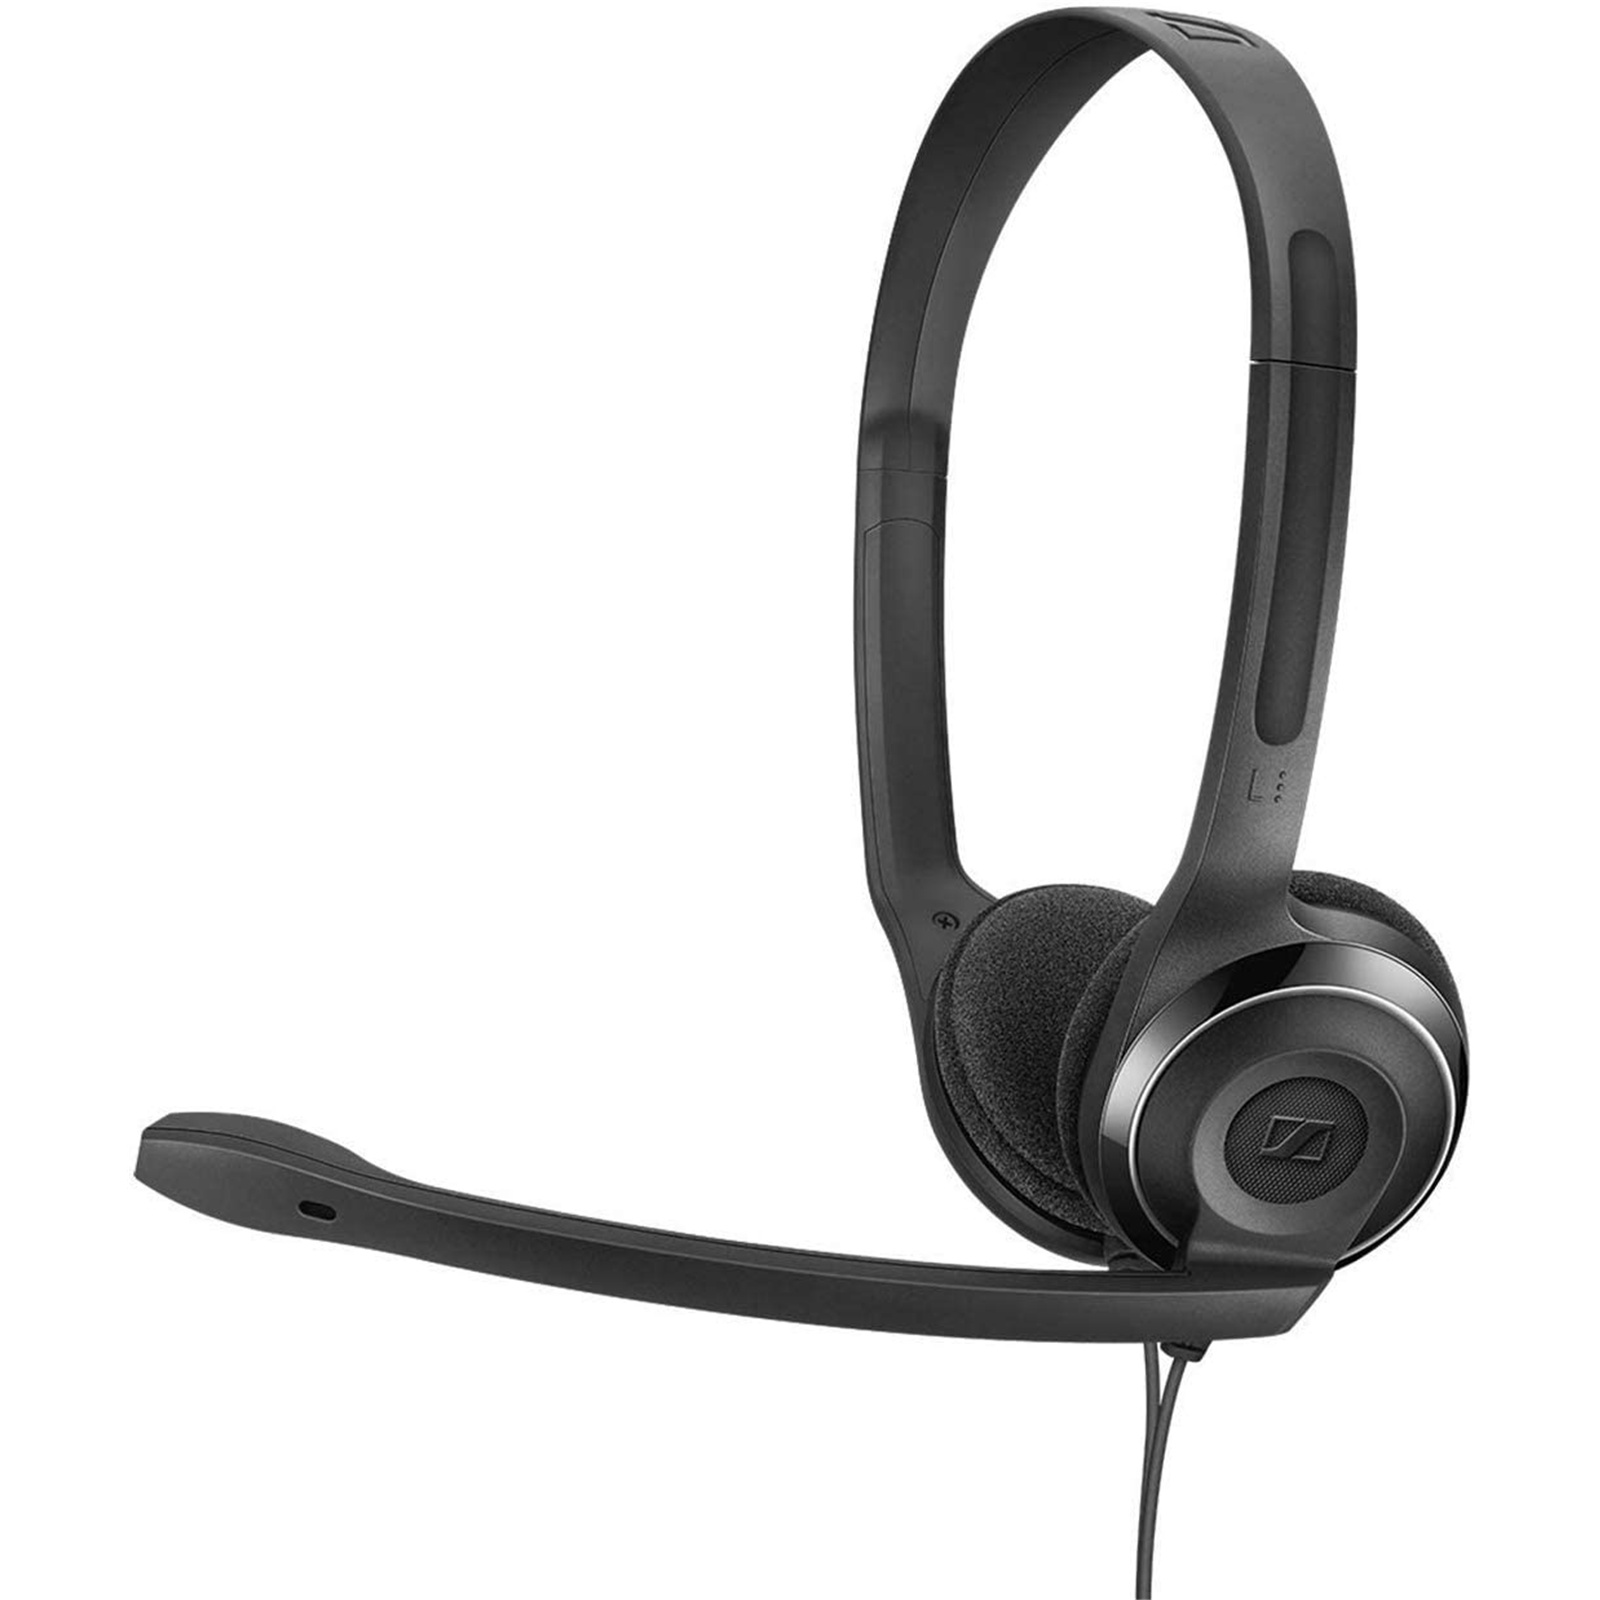 Buy the EPOS PC 8 USB v2 Home Office Headset for PC ( 1000432 ) online -  PBTech.com/au